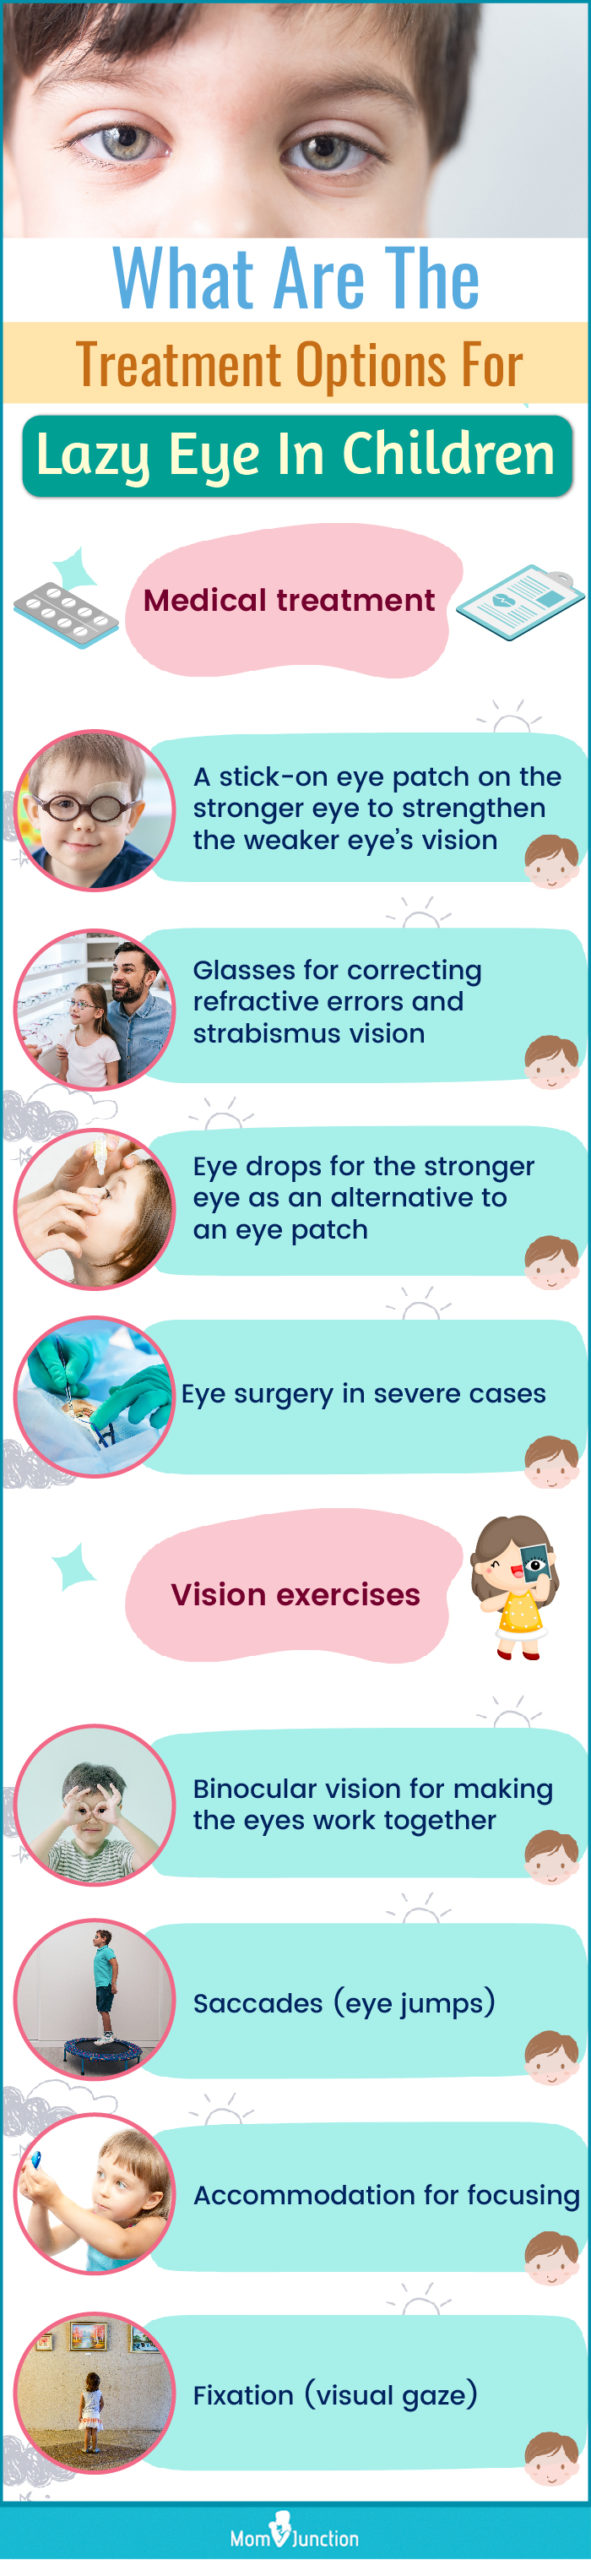 what are the treatment options for lazy eye in children (infographic)